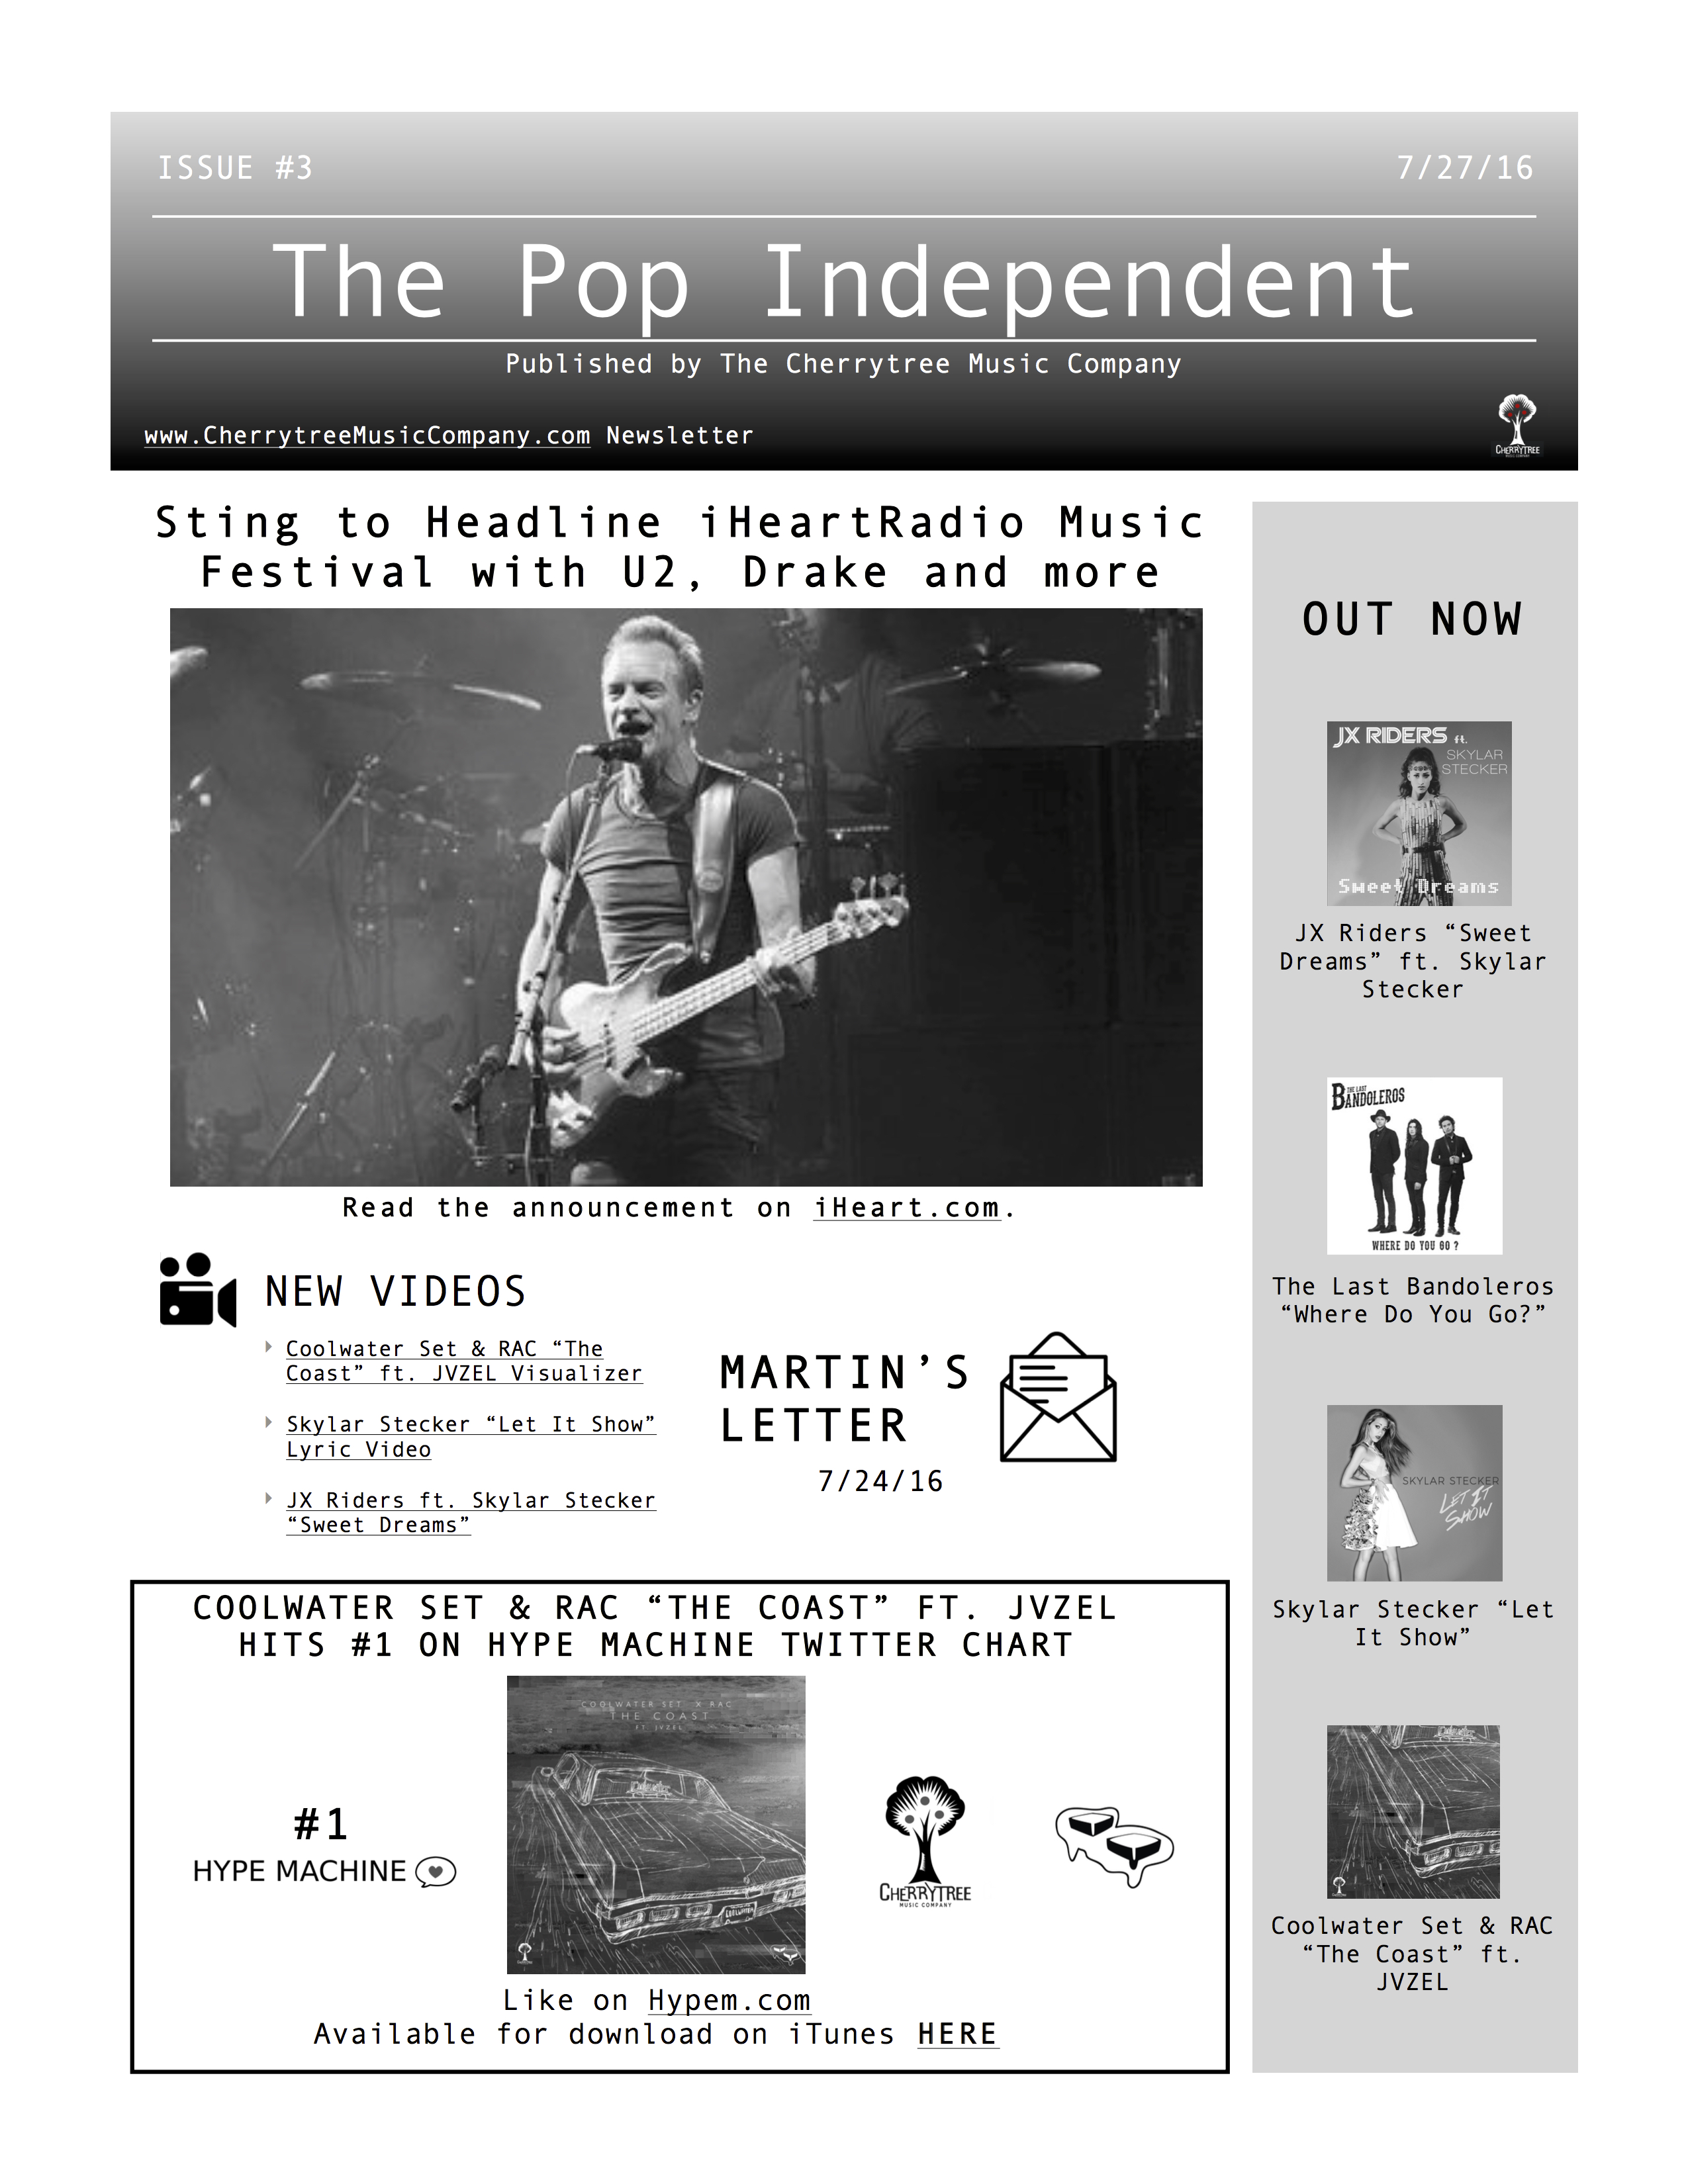 The Pop Independent, issue 3